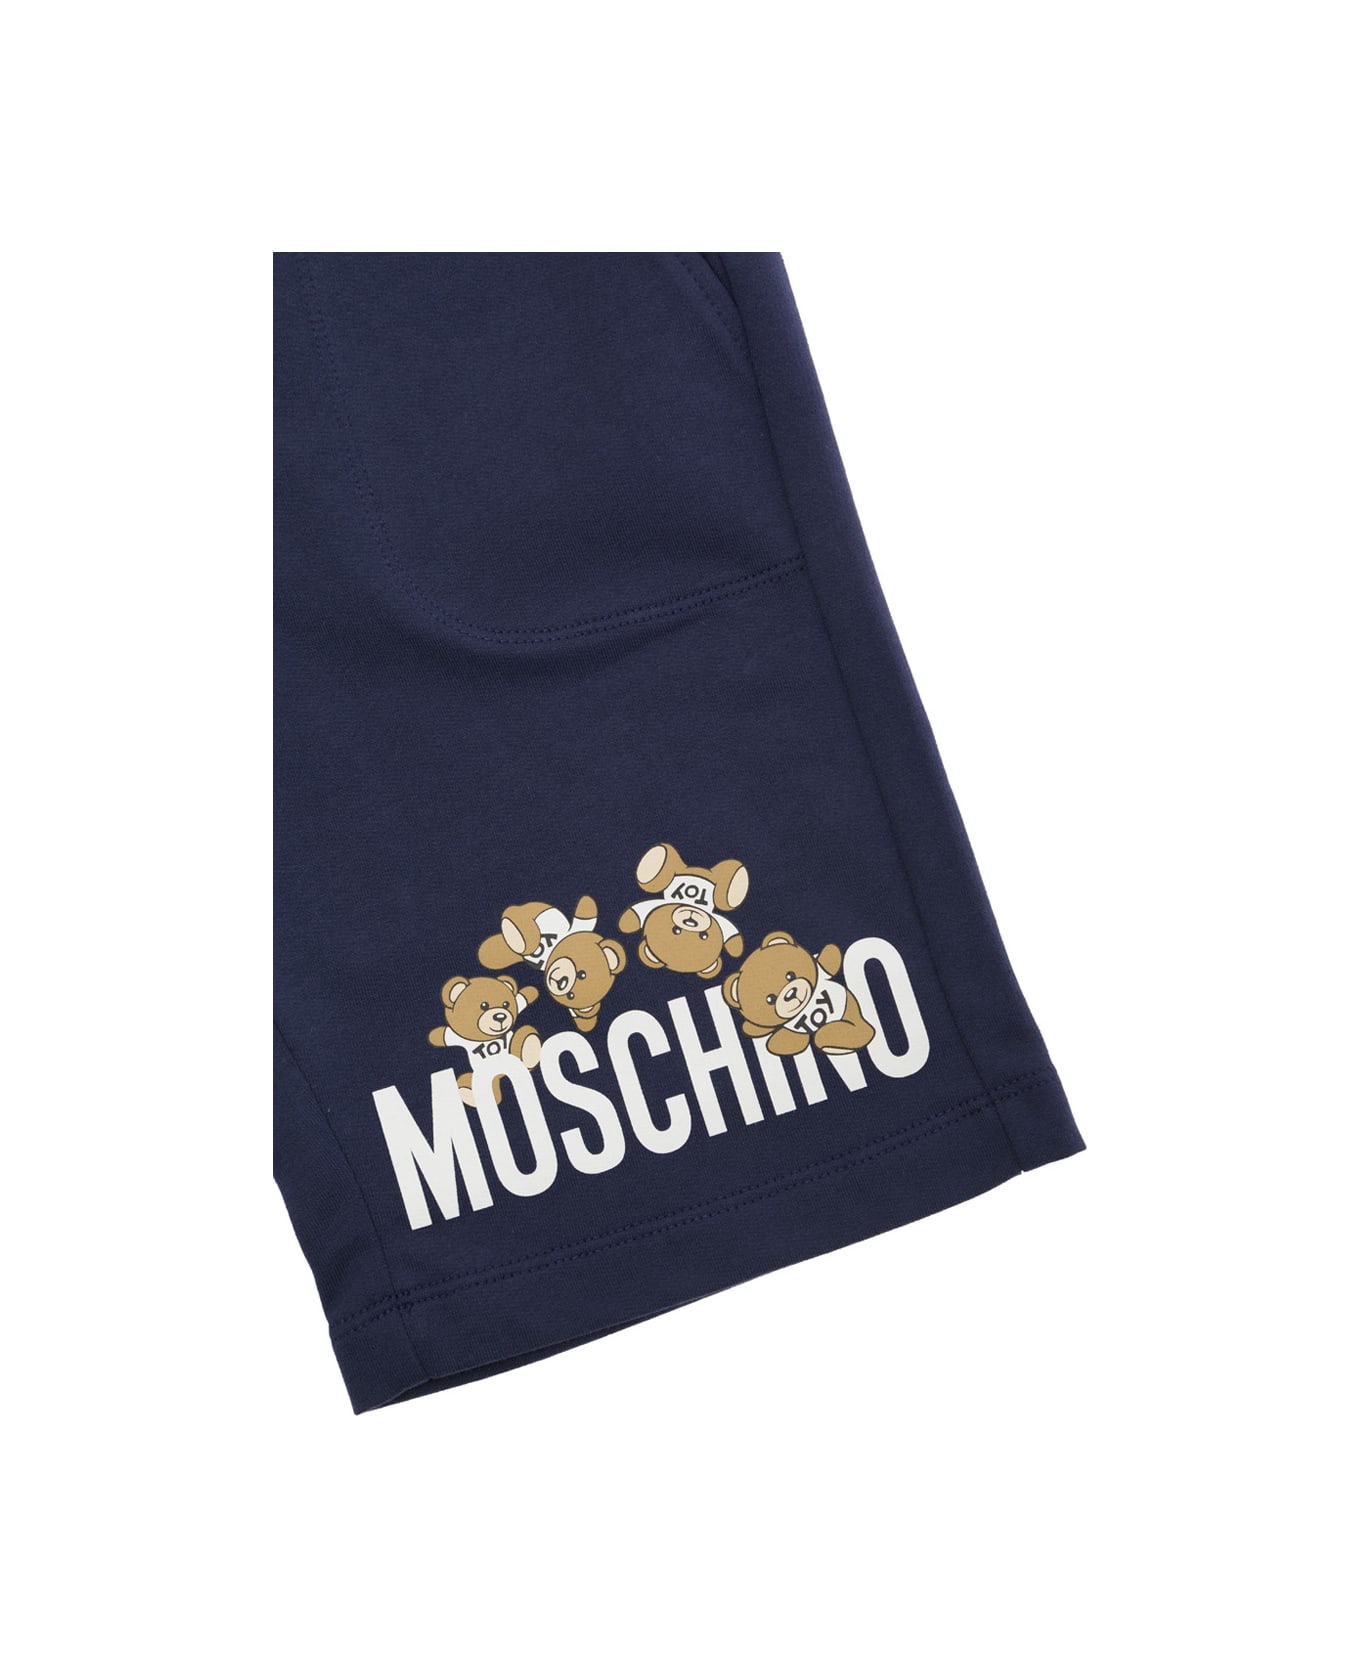 Moschino Blue Shorts With Logo Print And Drawstring In Cotton Boy - Blu